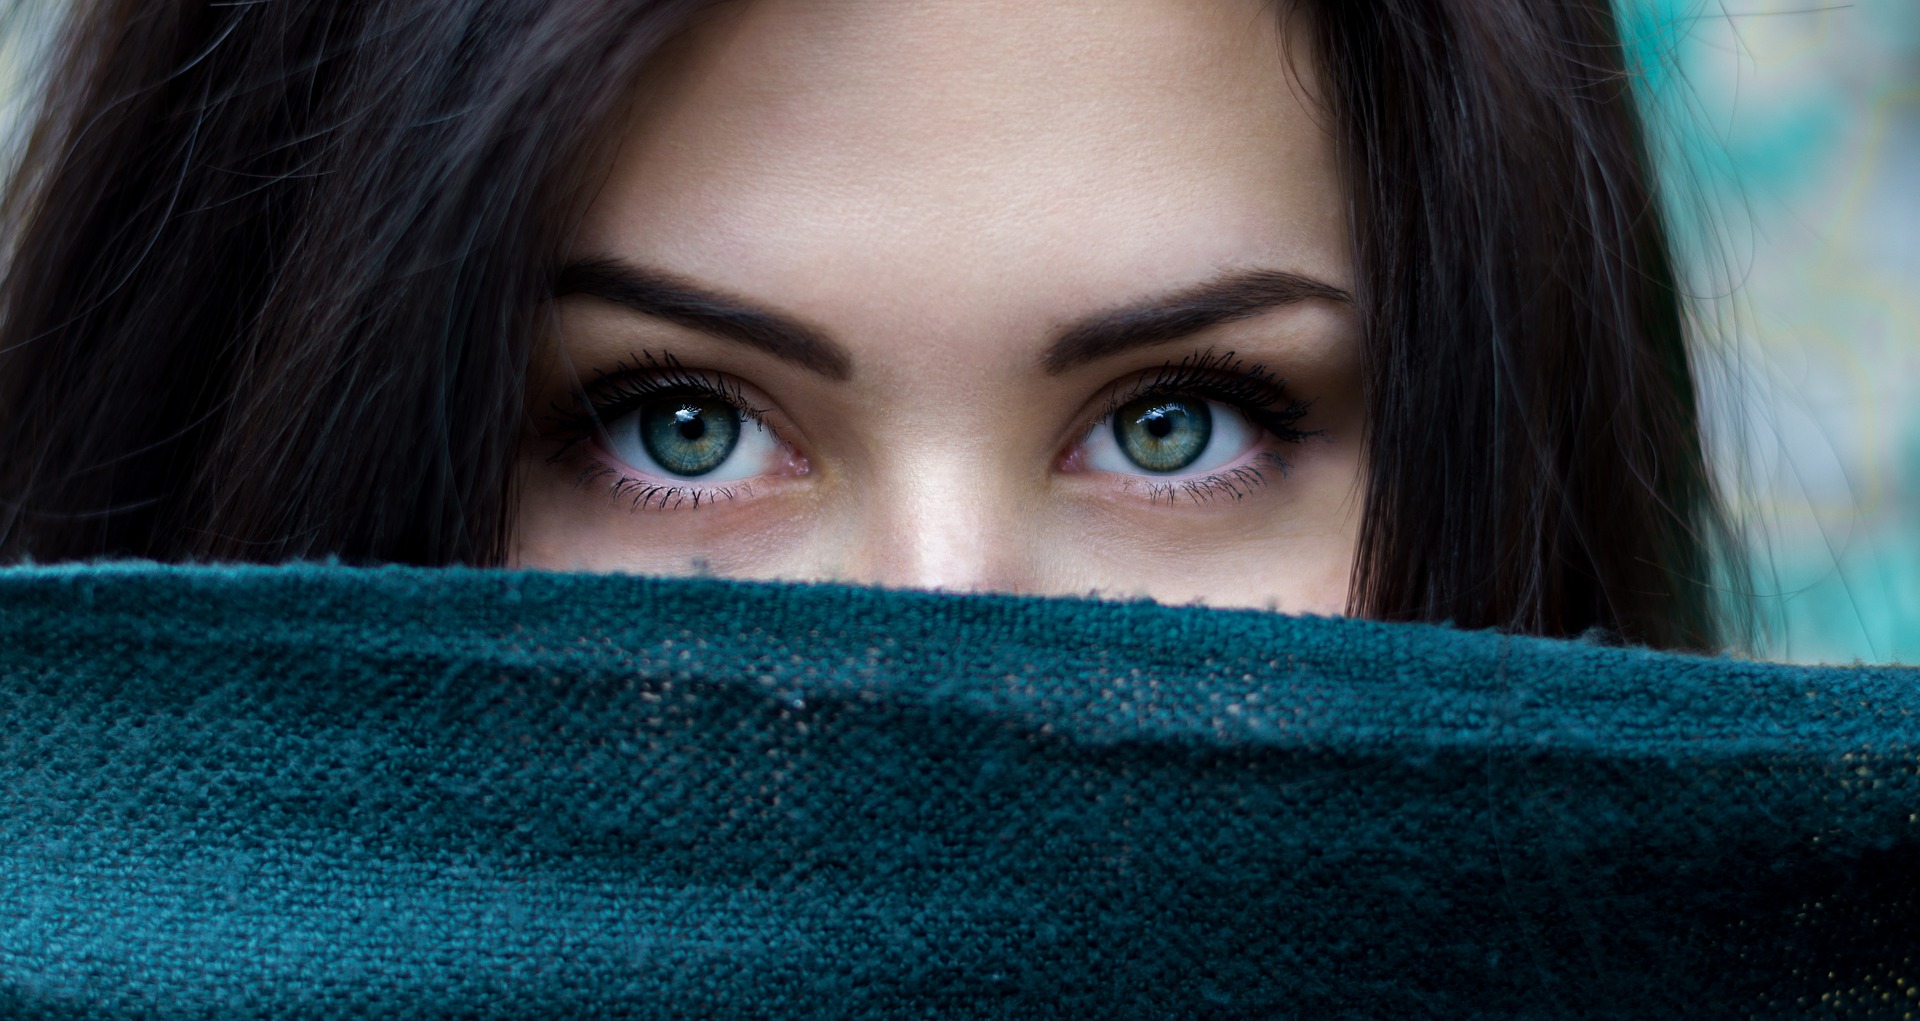 women with blue/green eyes with face obscured by blue towel